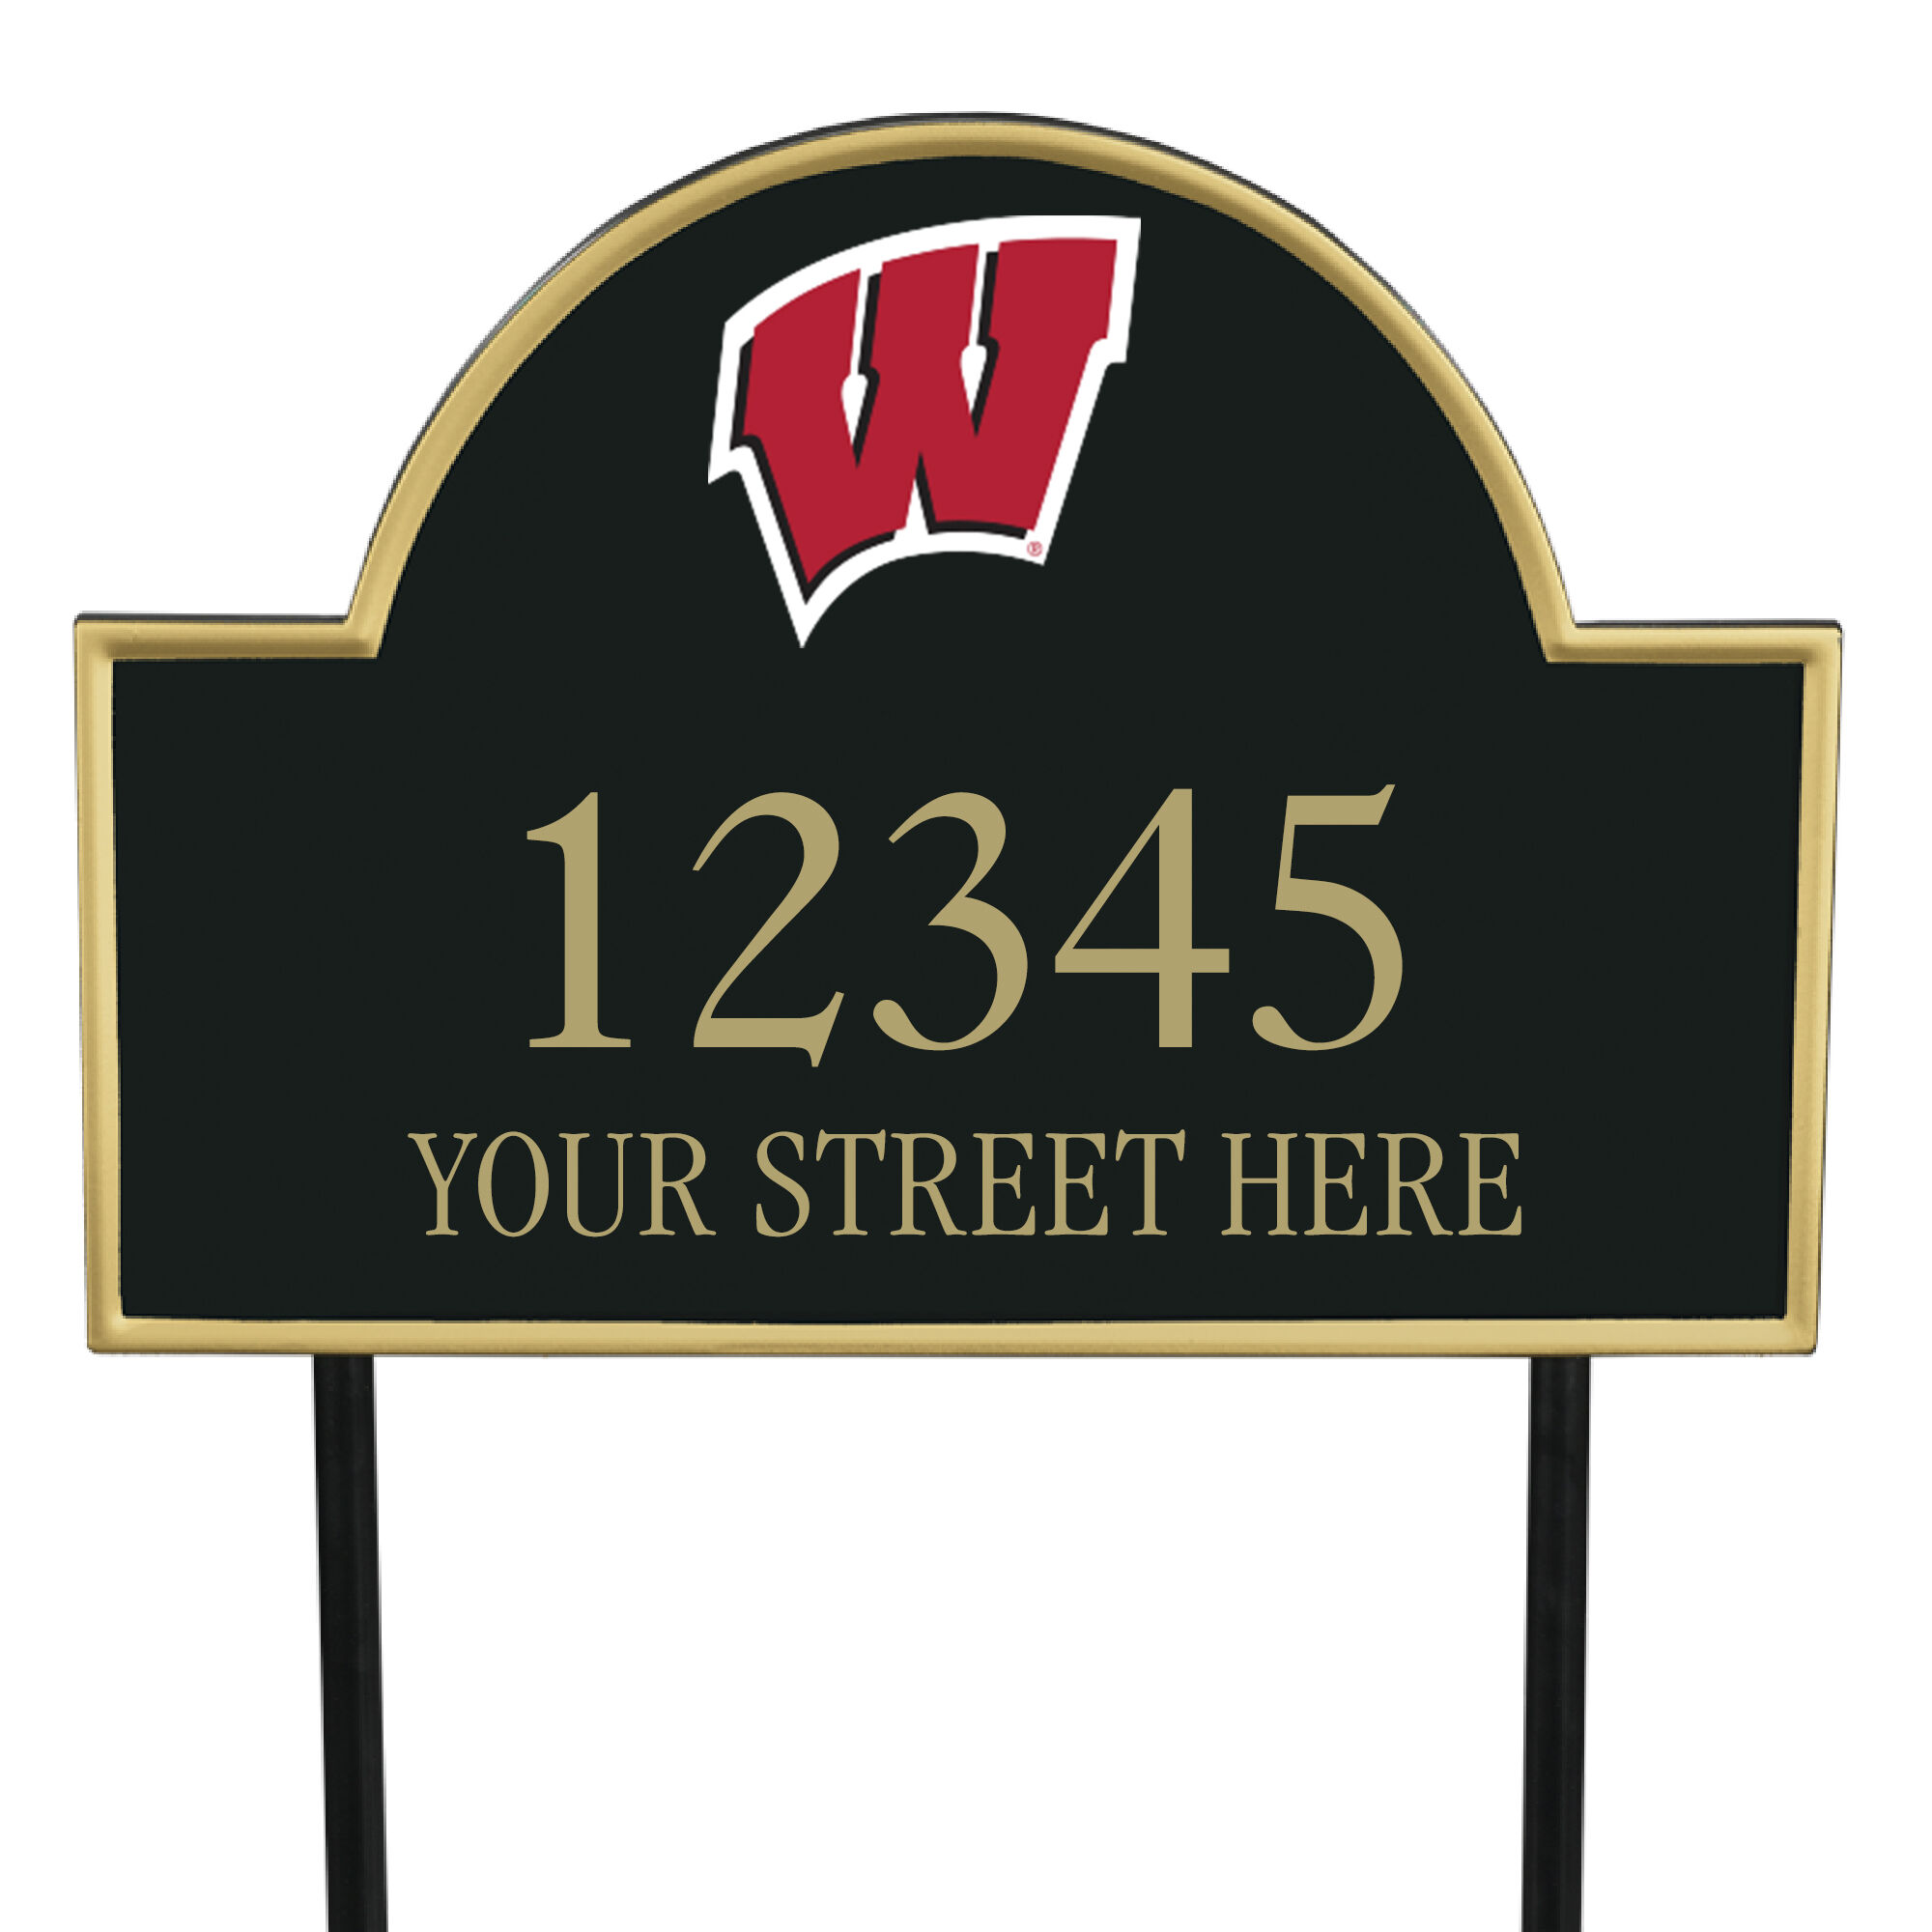 The College Personalized Address Plaque 5716 0384 b Wisconsin